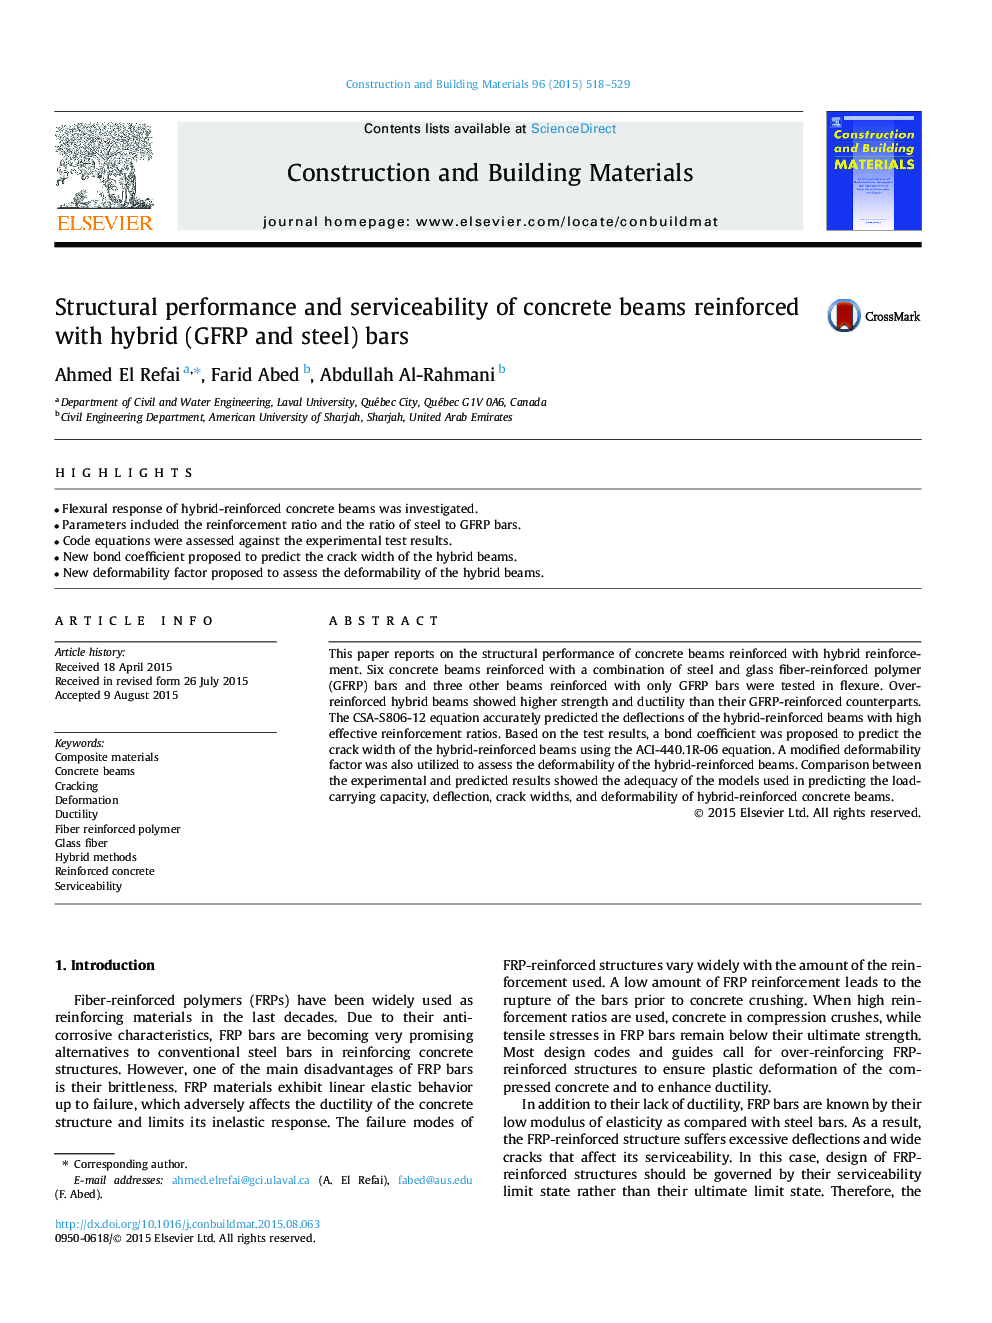 Structural performance and serviceability of concrete beams reinforced with hybrid (GFRP and steel) bars